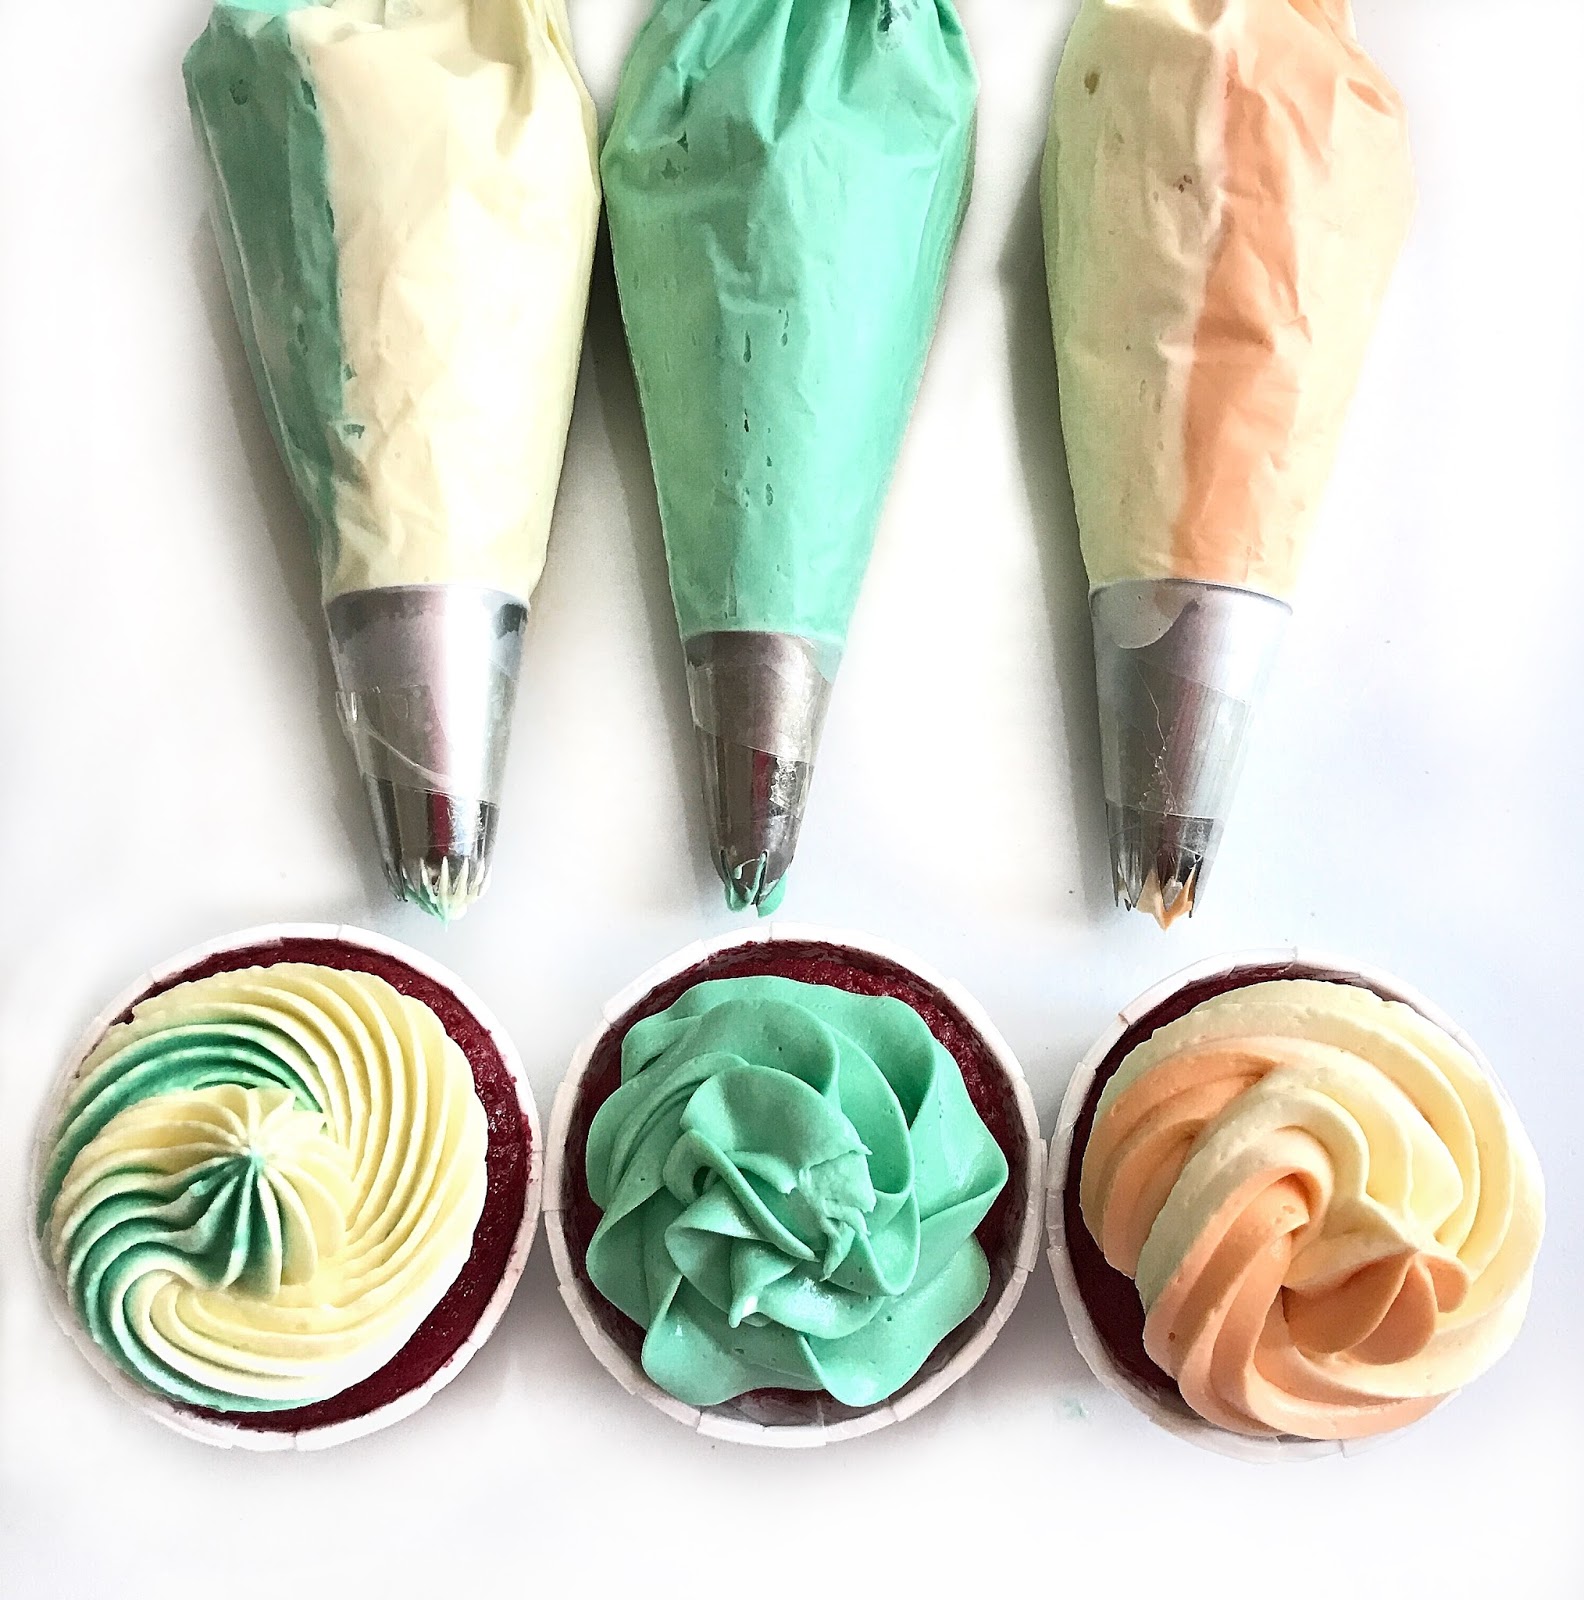 Using different piping tips to frost cupcakes